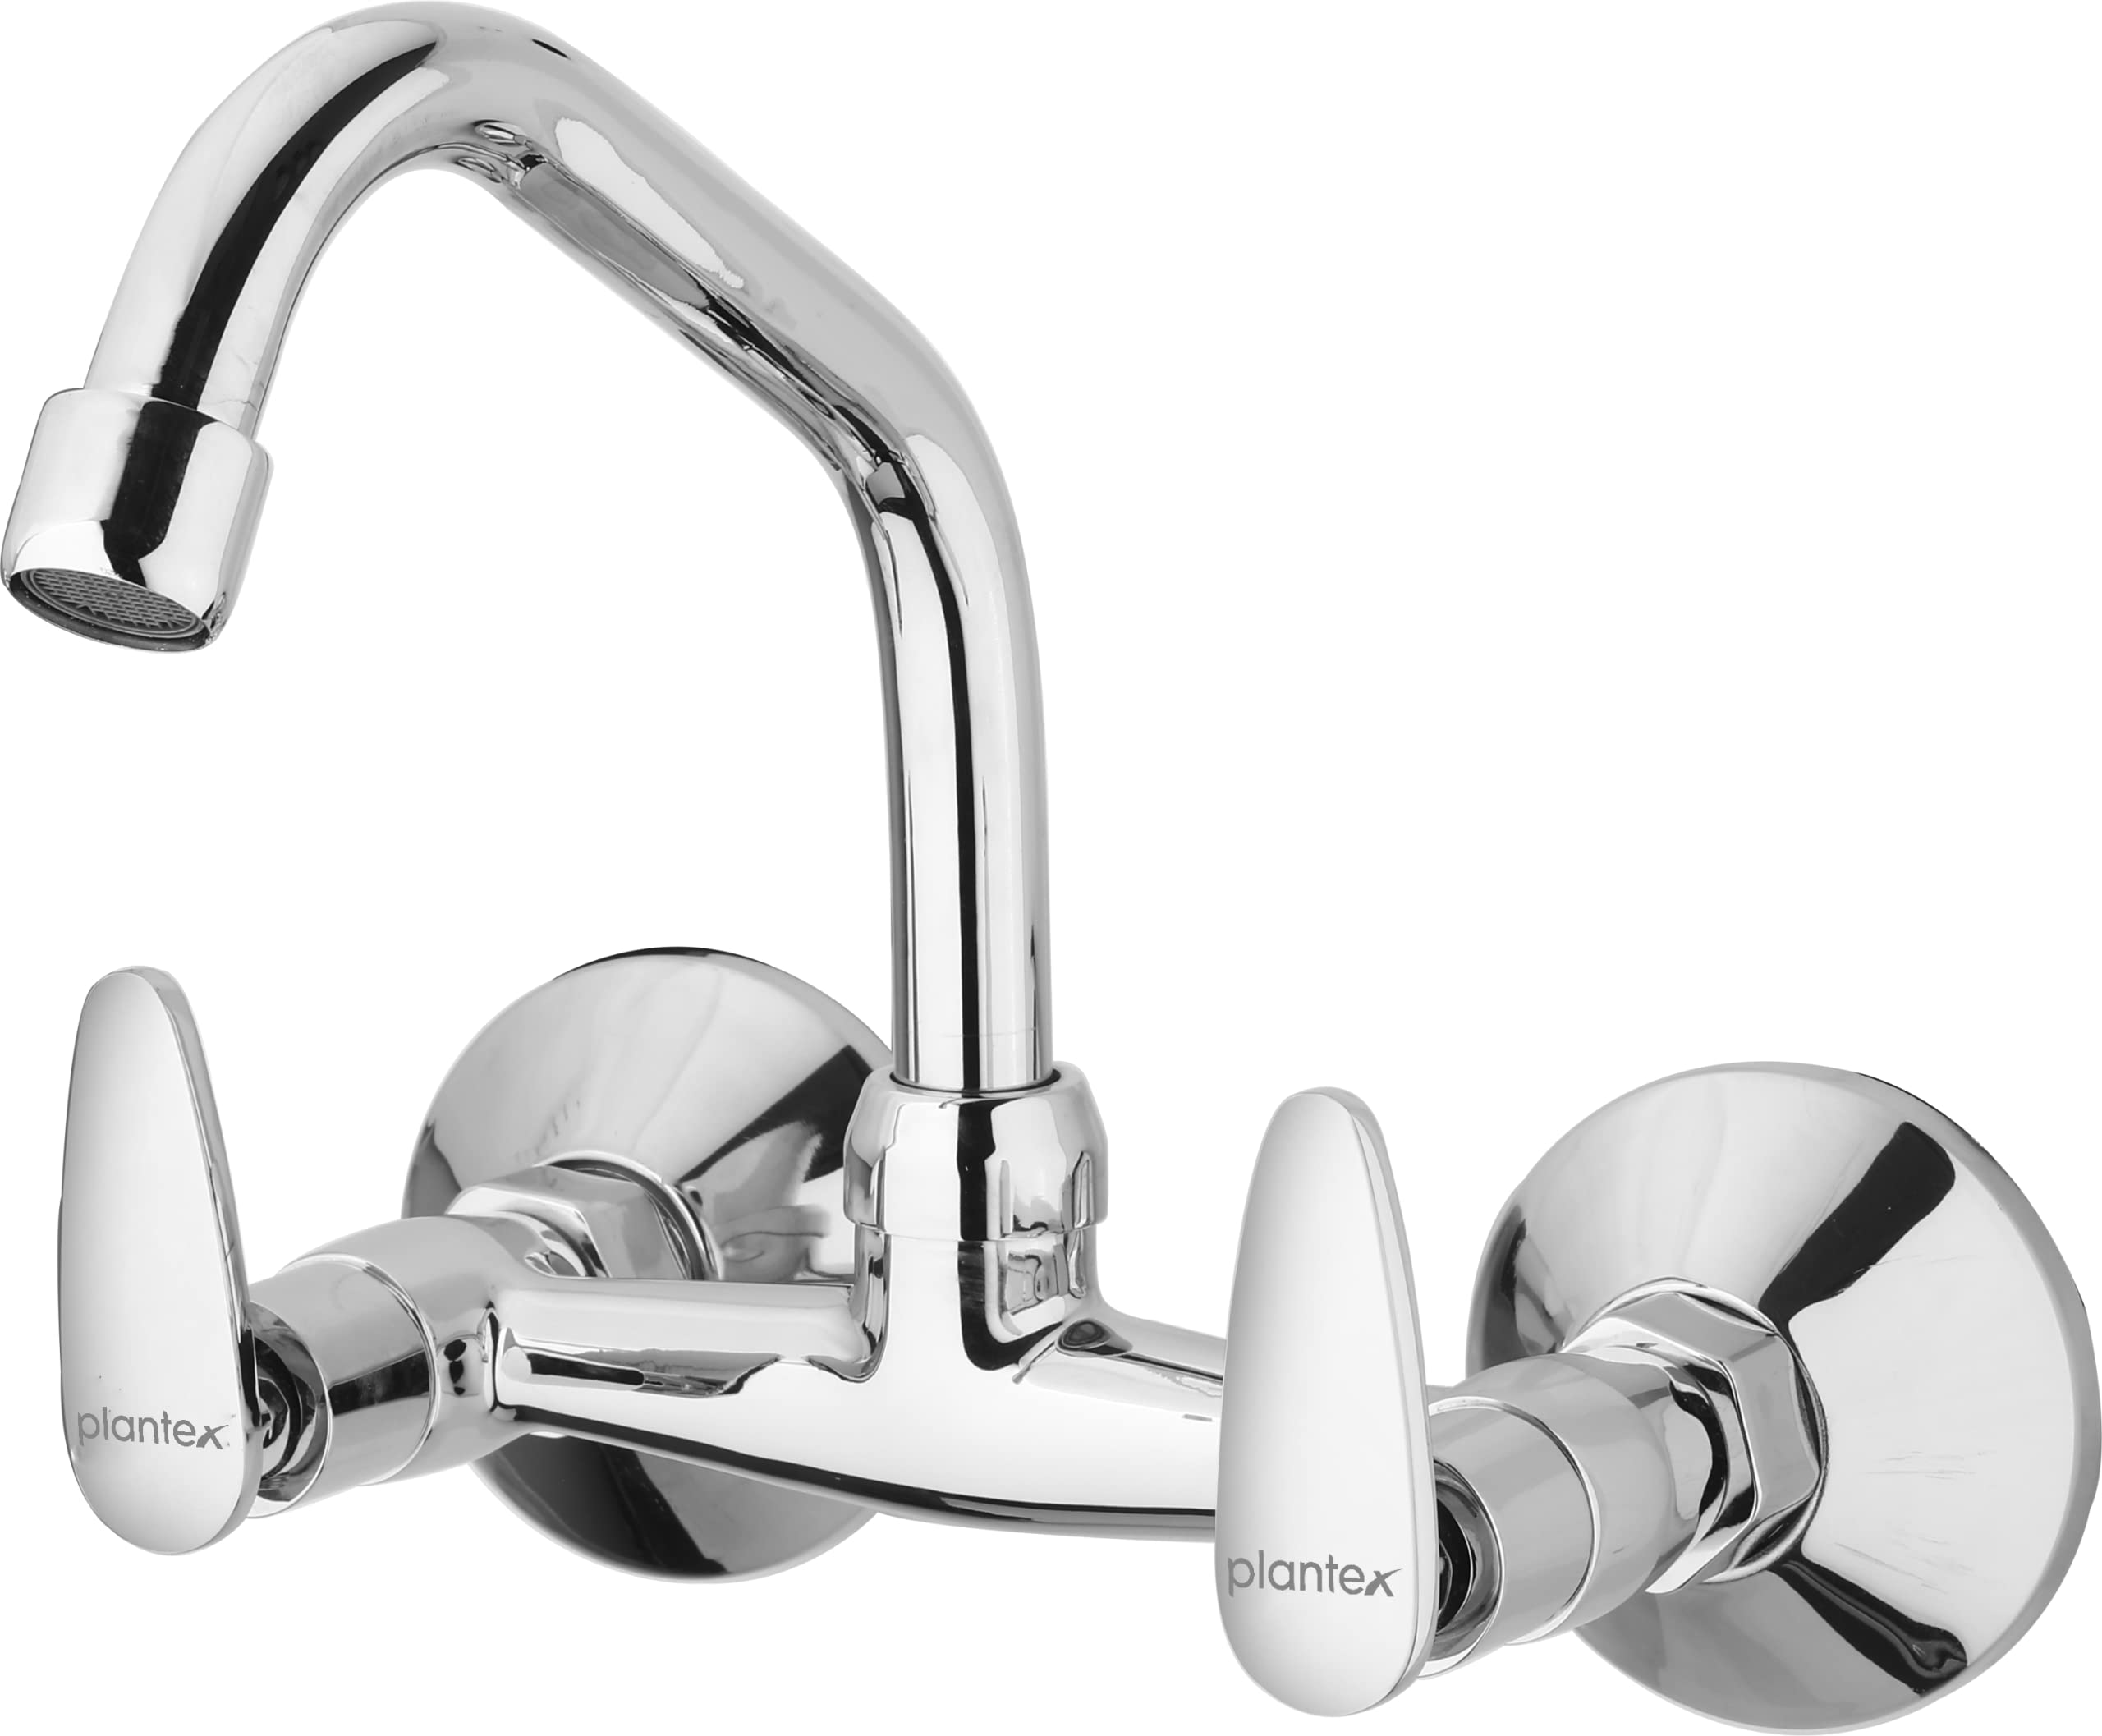 Plantex LEA-714 Pure Brass Kitchen Sink Mixer (High Arch 360 Degree)/ Double Handle Hot & Cold Water Tap for Bathroom with Brass Wall Flange & Teflon Tape (Mirror-Chrome Finish)